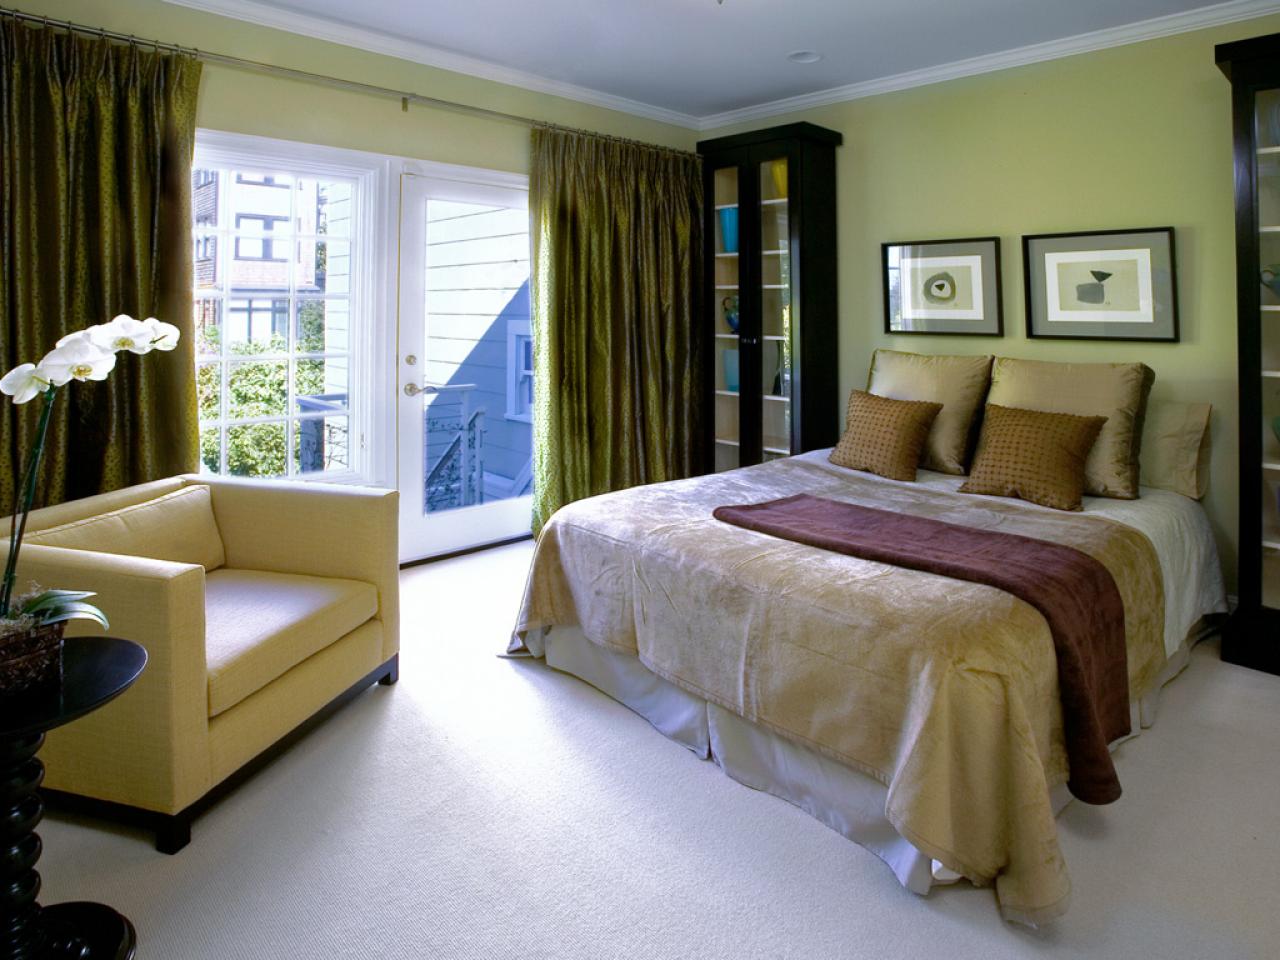 Modern Bedroom Color Schemes: Pictures, Options & Ideas ...